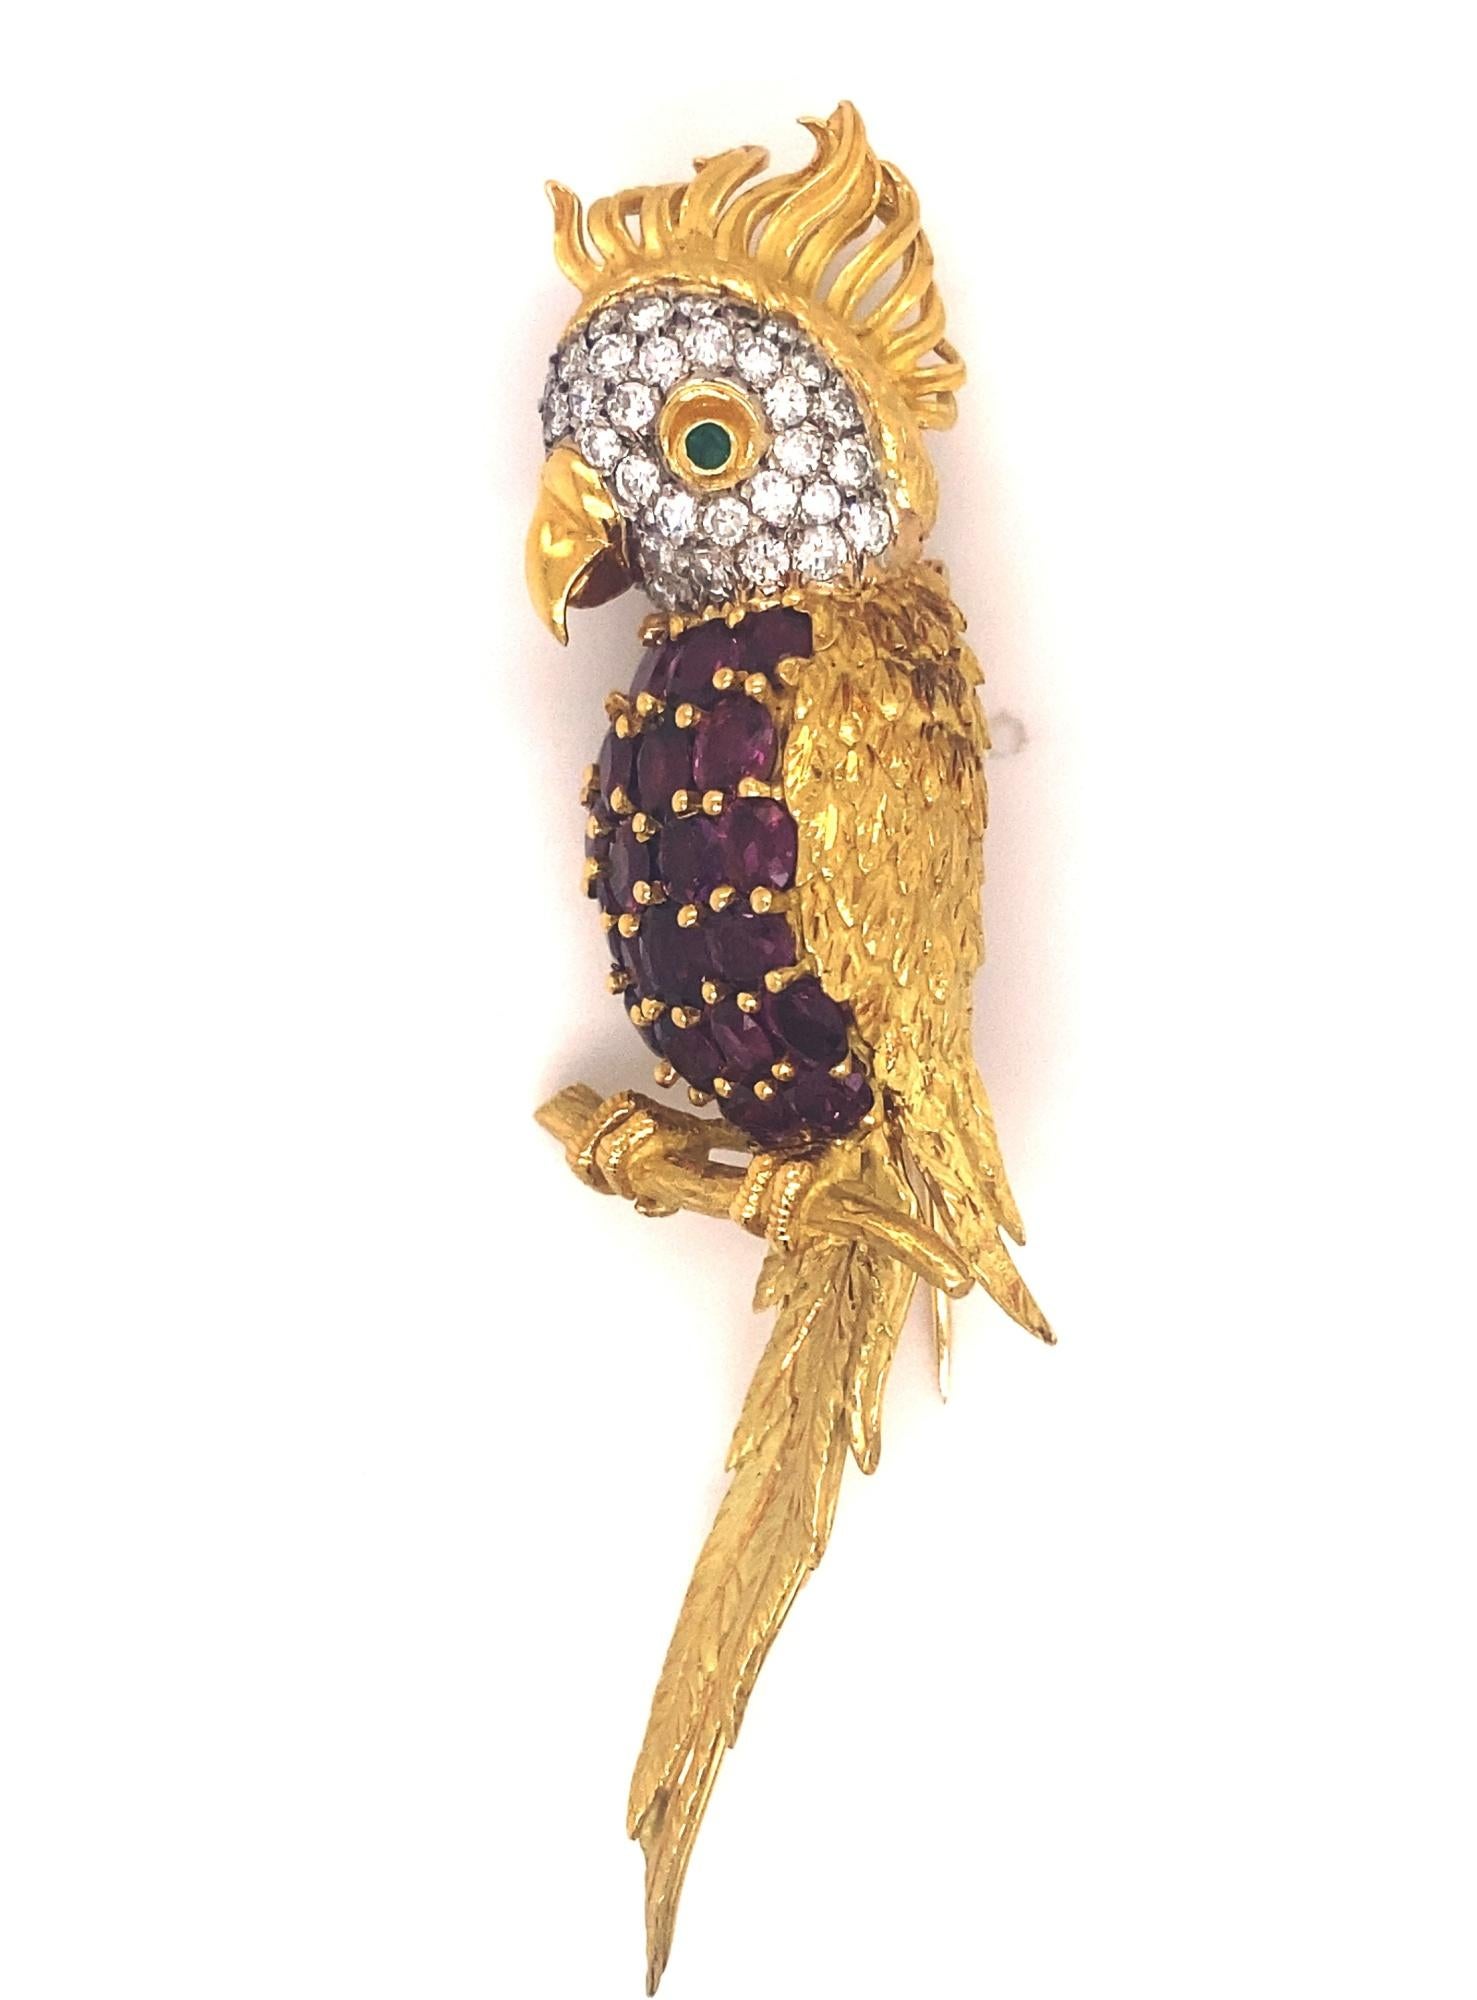 This is a beautiful large Cockatoo brooch with high quality rubies and diamonds. The feathers are finely detailed amazing gold work. Brooch containing 22 round and oval cut rubies weighing approximately 6.00 carats total great clarity and color.